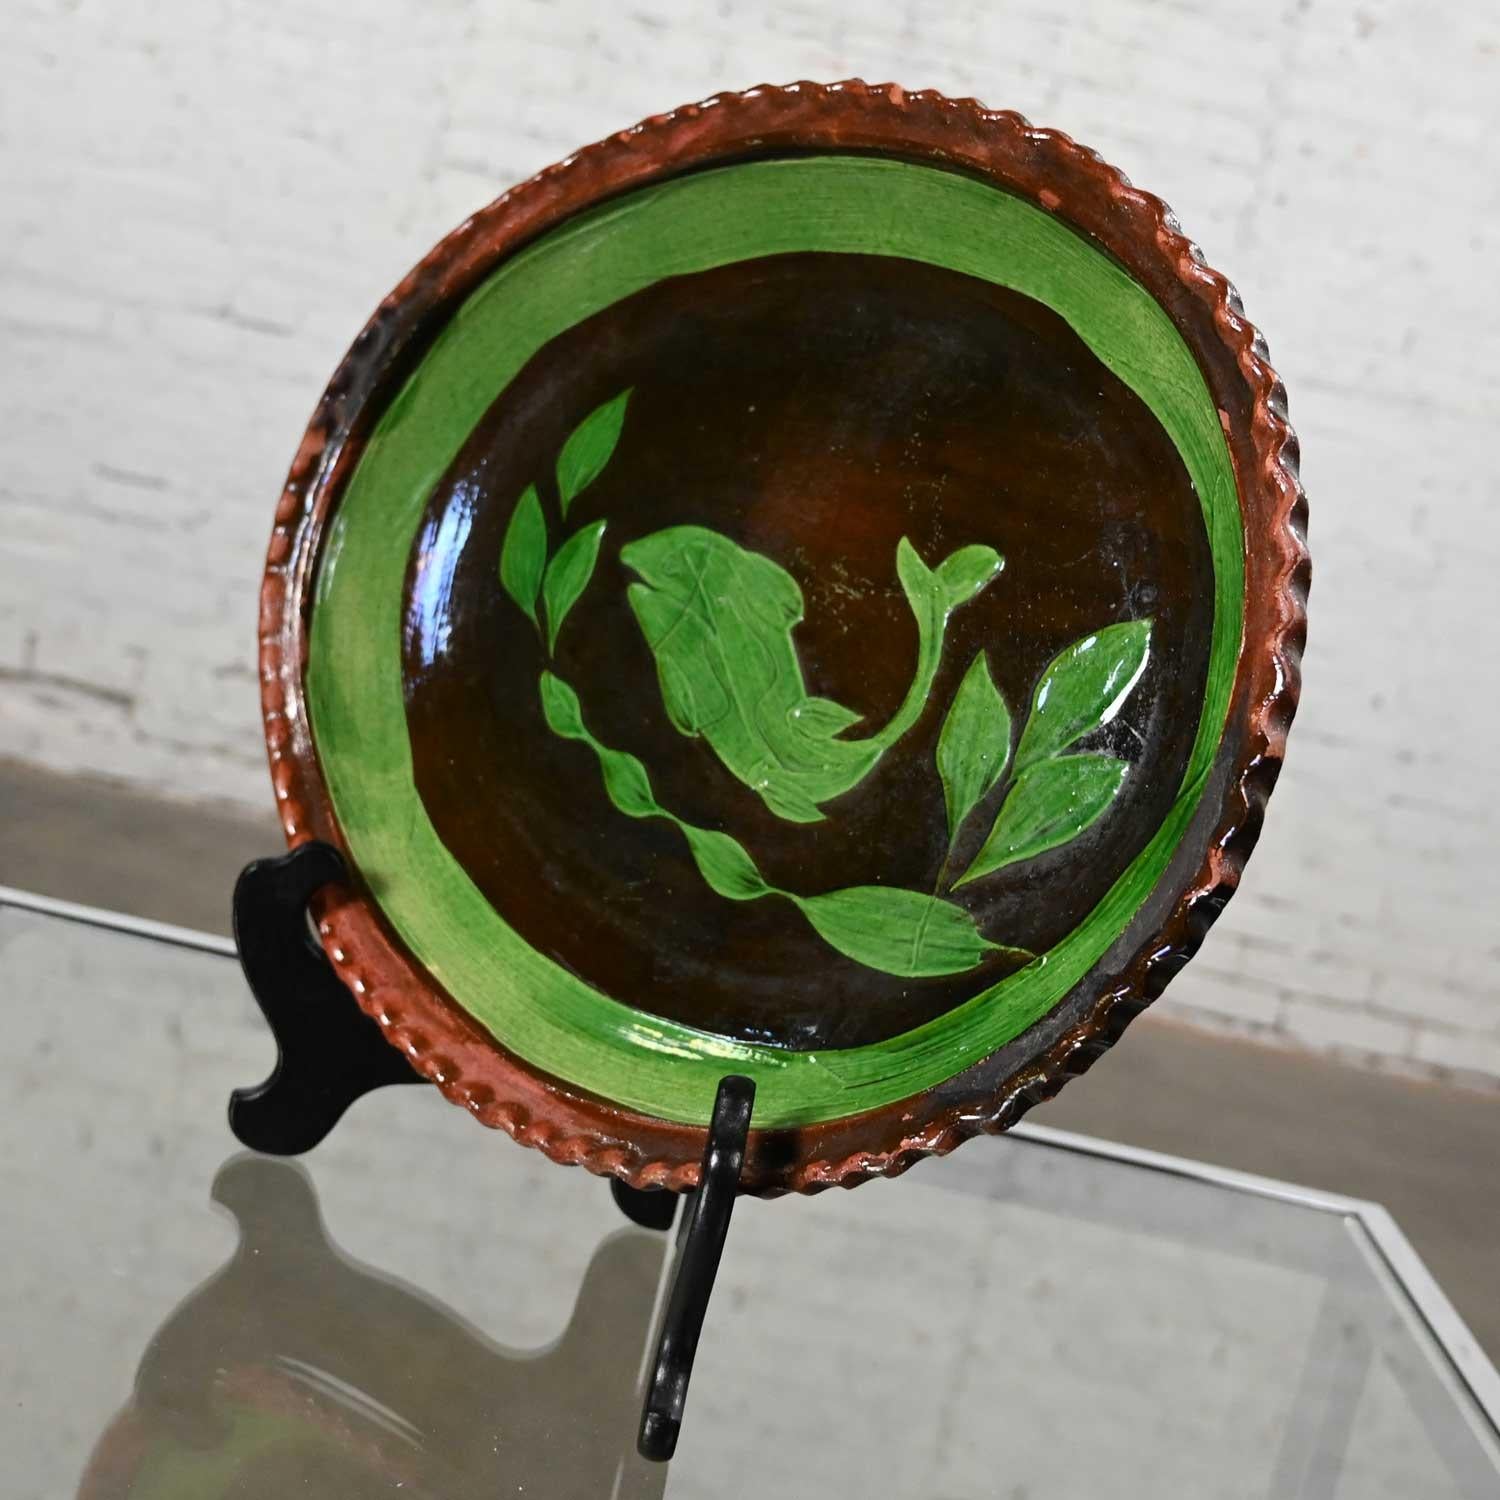 Clay Mexican Patamban Hand Painted Fish Design Folk Art Green & Brown Glazed Platter For Sale